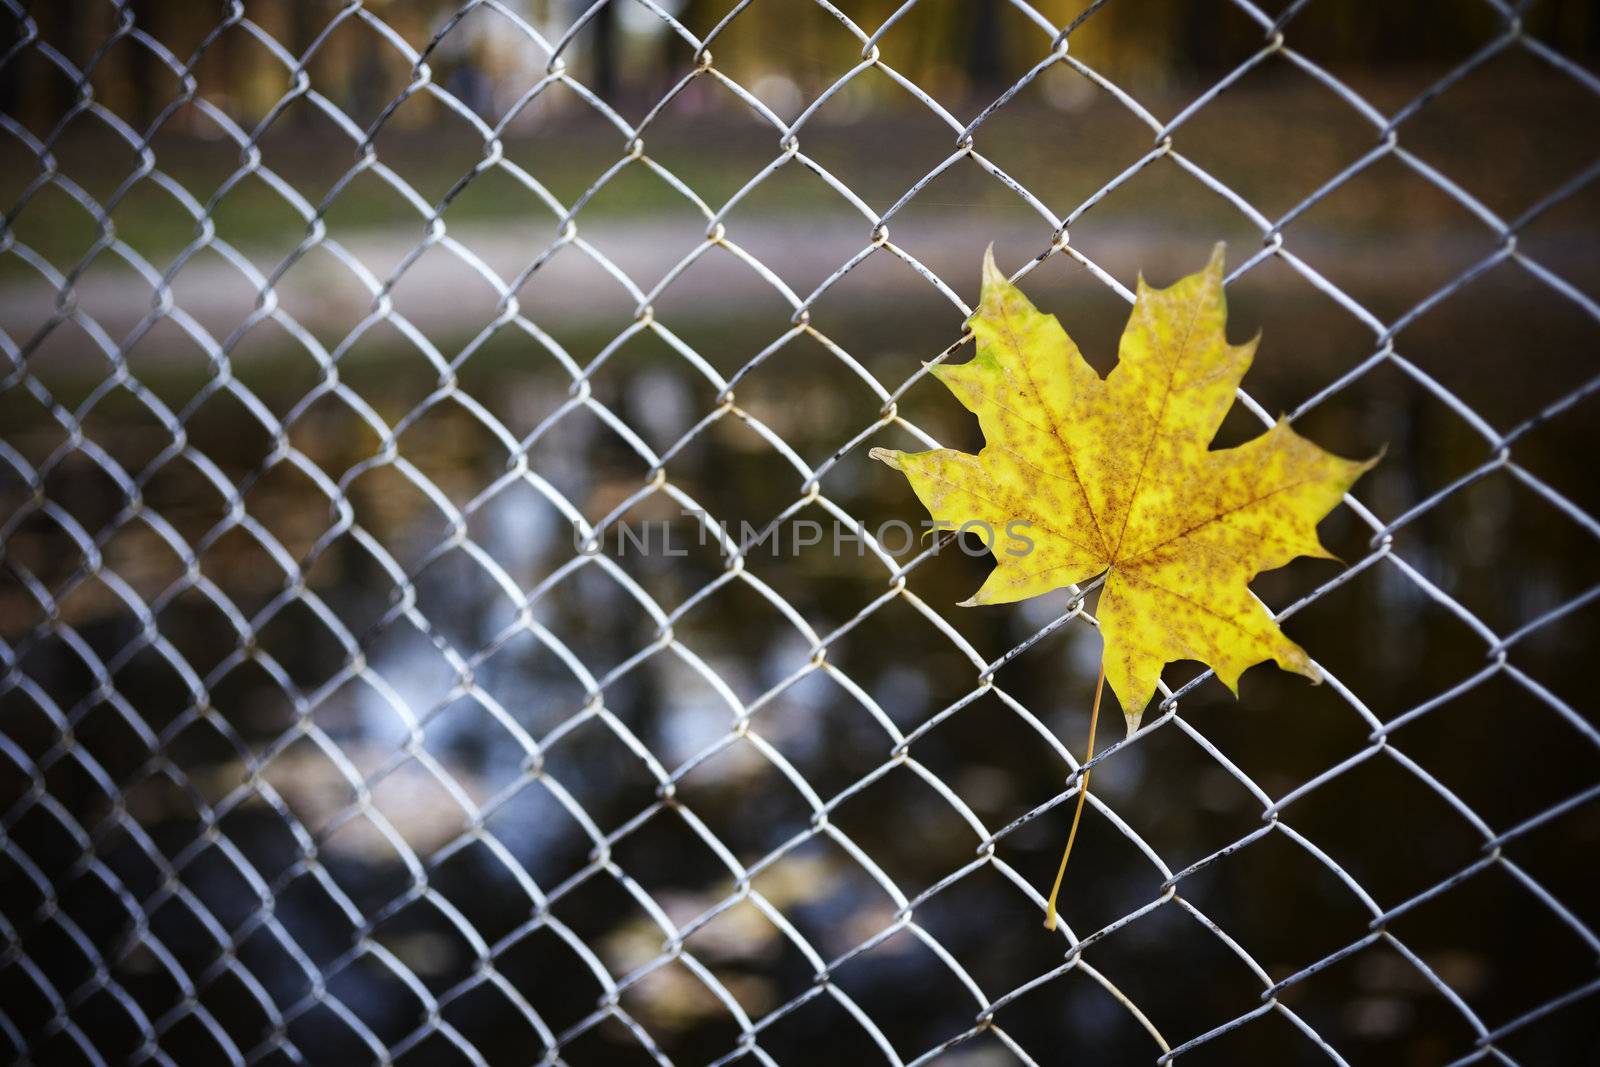 yellow maple leaf on metal grid, selective focus